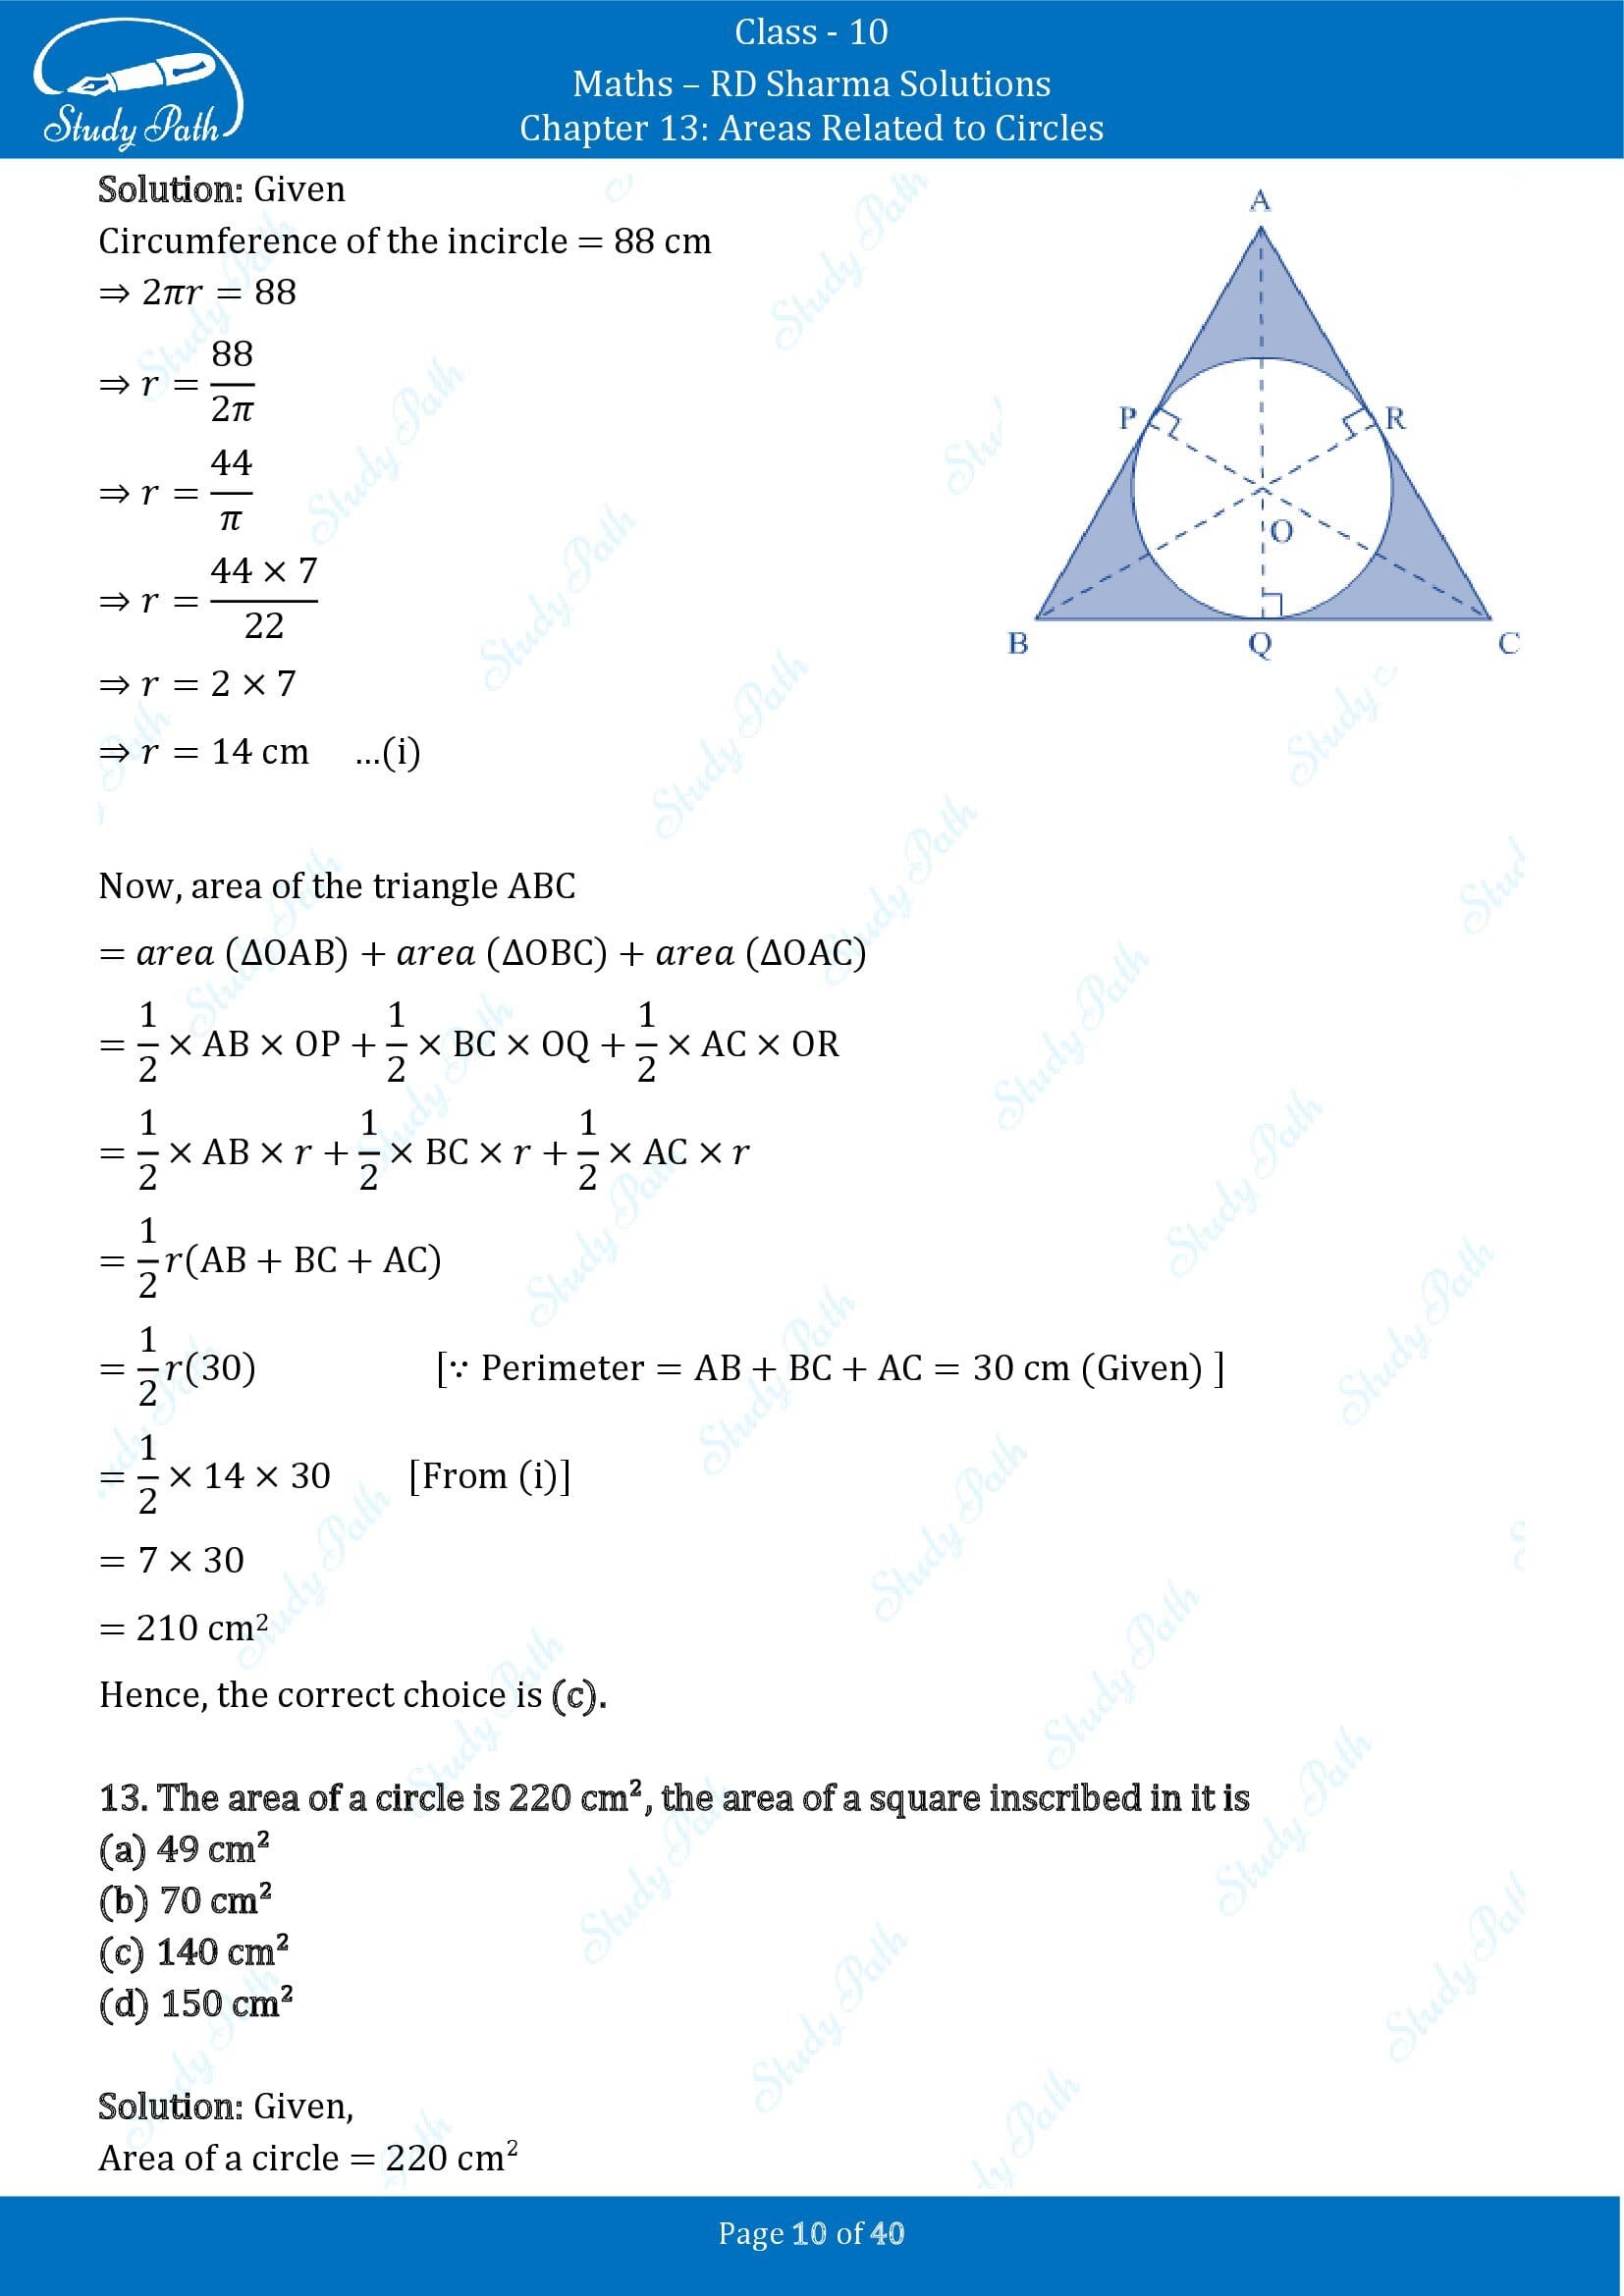 RD Sharma Solutions Class 10 Chapter 13 Areas Related to Circles Multiple Choice Question MCQs 00010